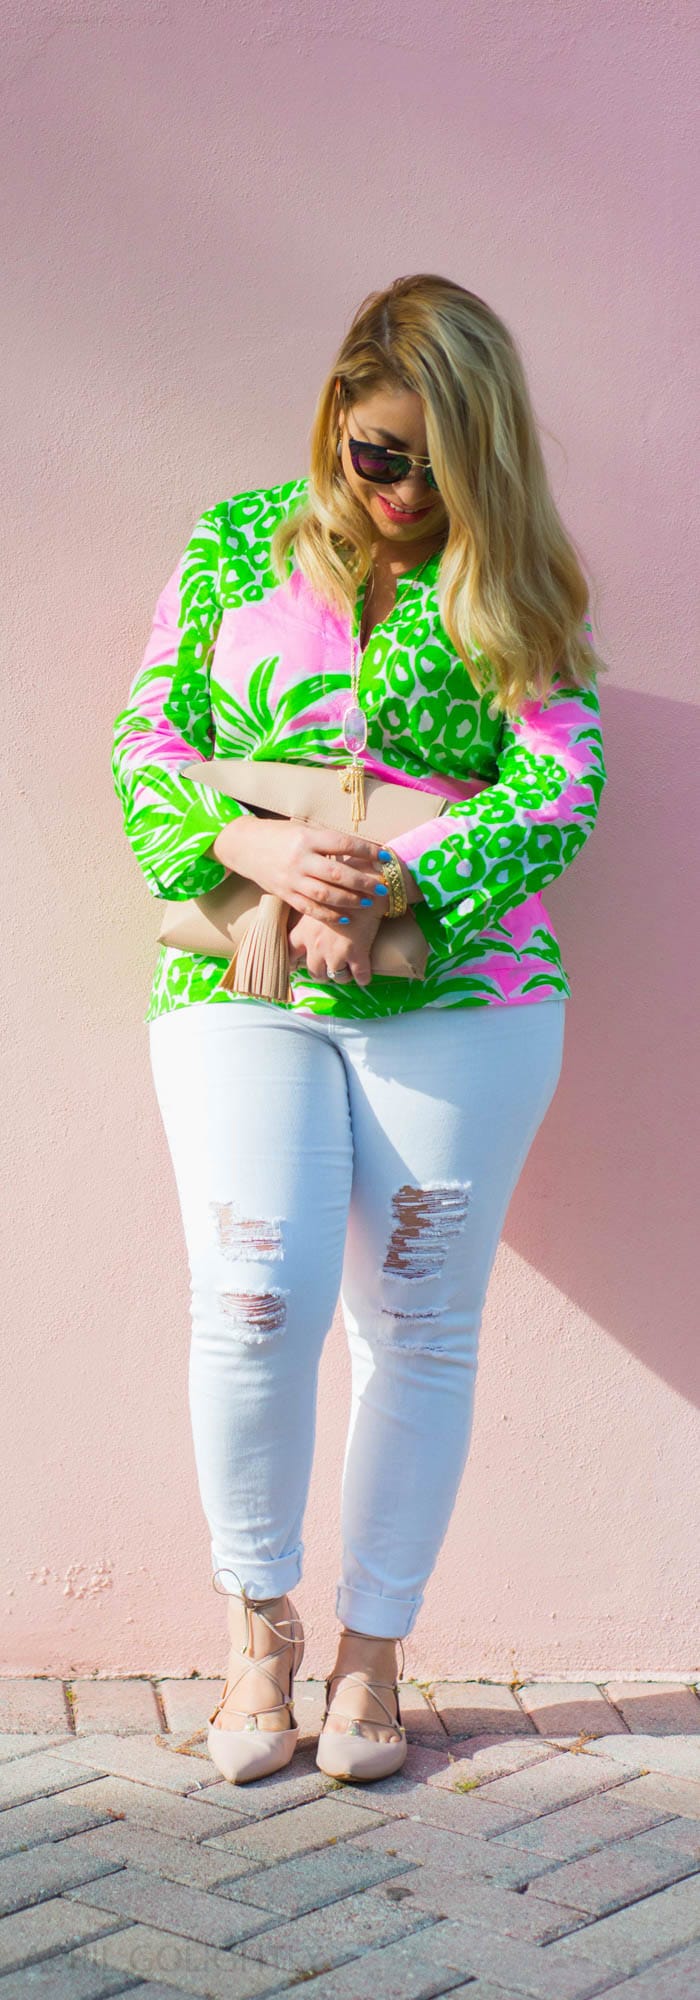 Cooler in Cotton Lilly Pulitzer Tunic Top and white jeans (1 of 1)-3